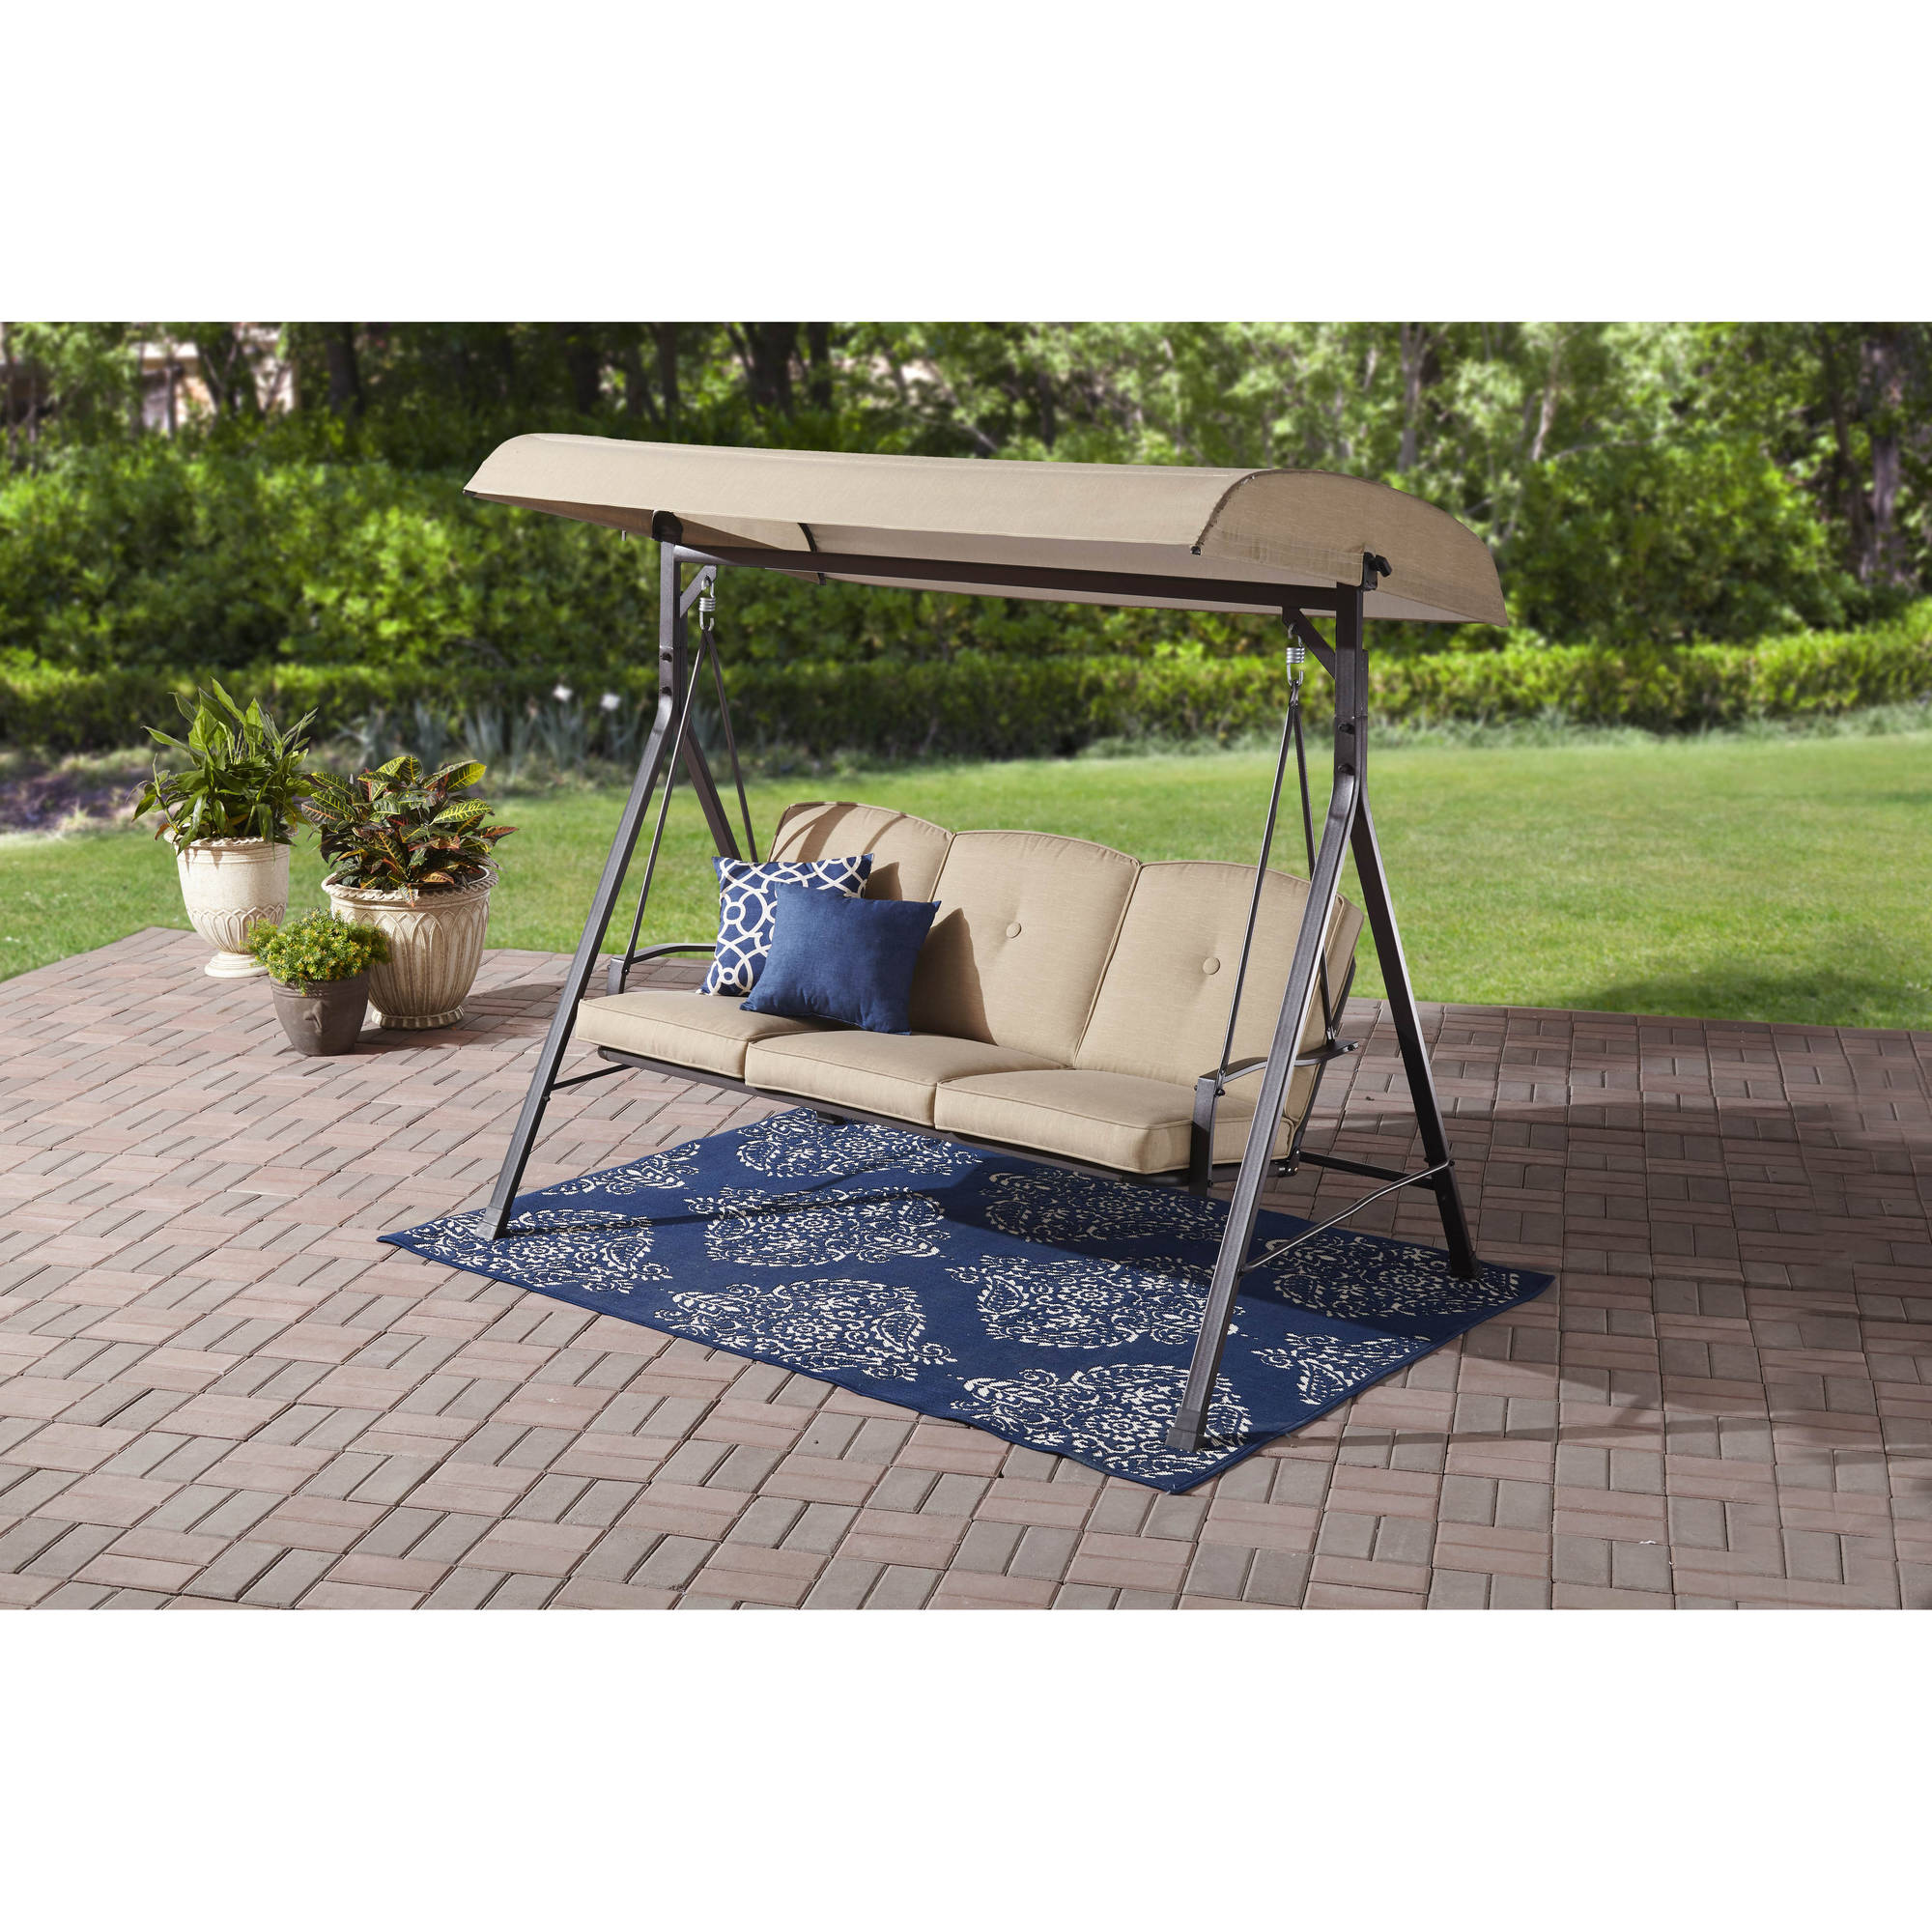 Mainstays Forest Hills 3-Seat Cushion Canopy Porch Swing, Beige - image 1 of 5